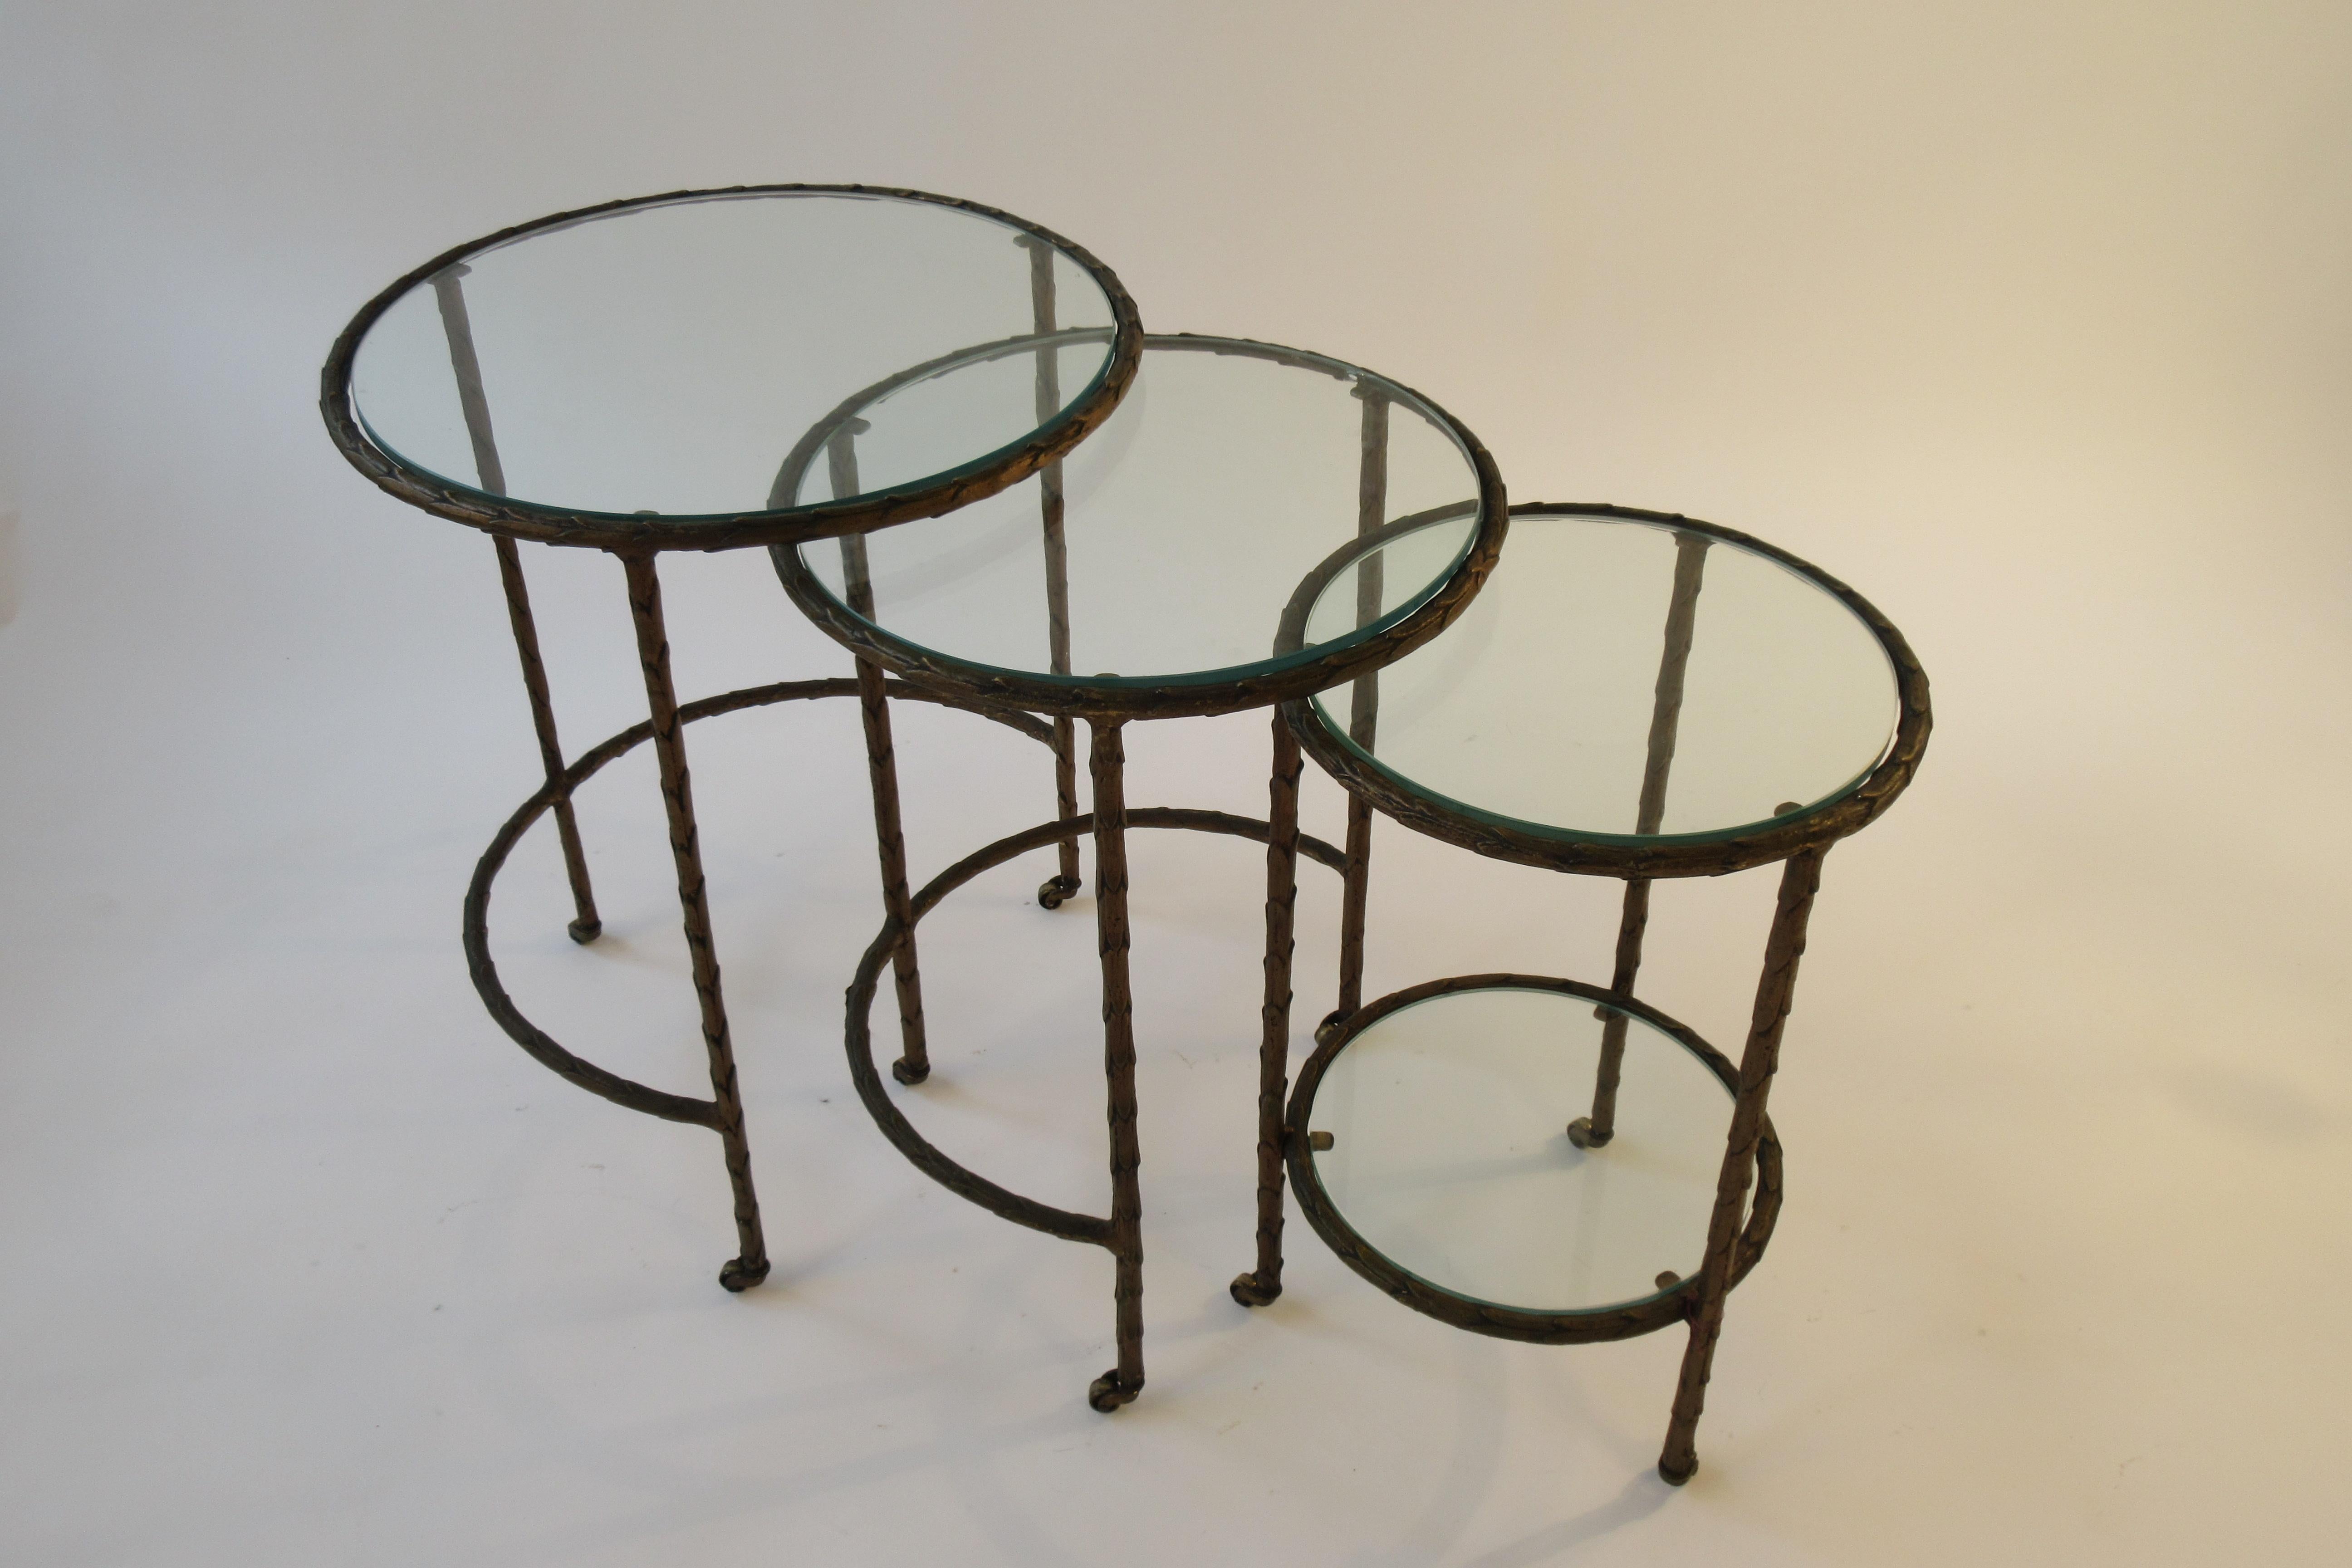 1950s Baguès bronze circular nesting tables. All three tables sit together to form one table. Unfortunately our pictures came out very dark, these tables are bronze.
